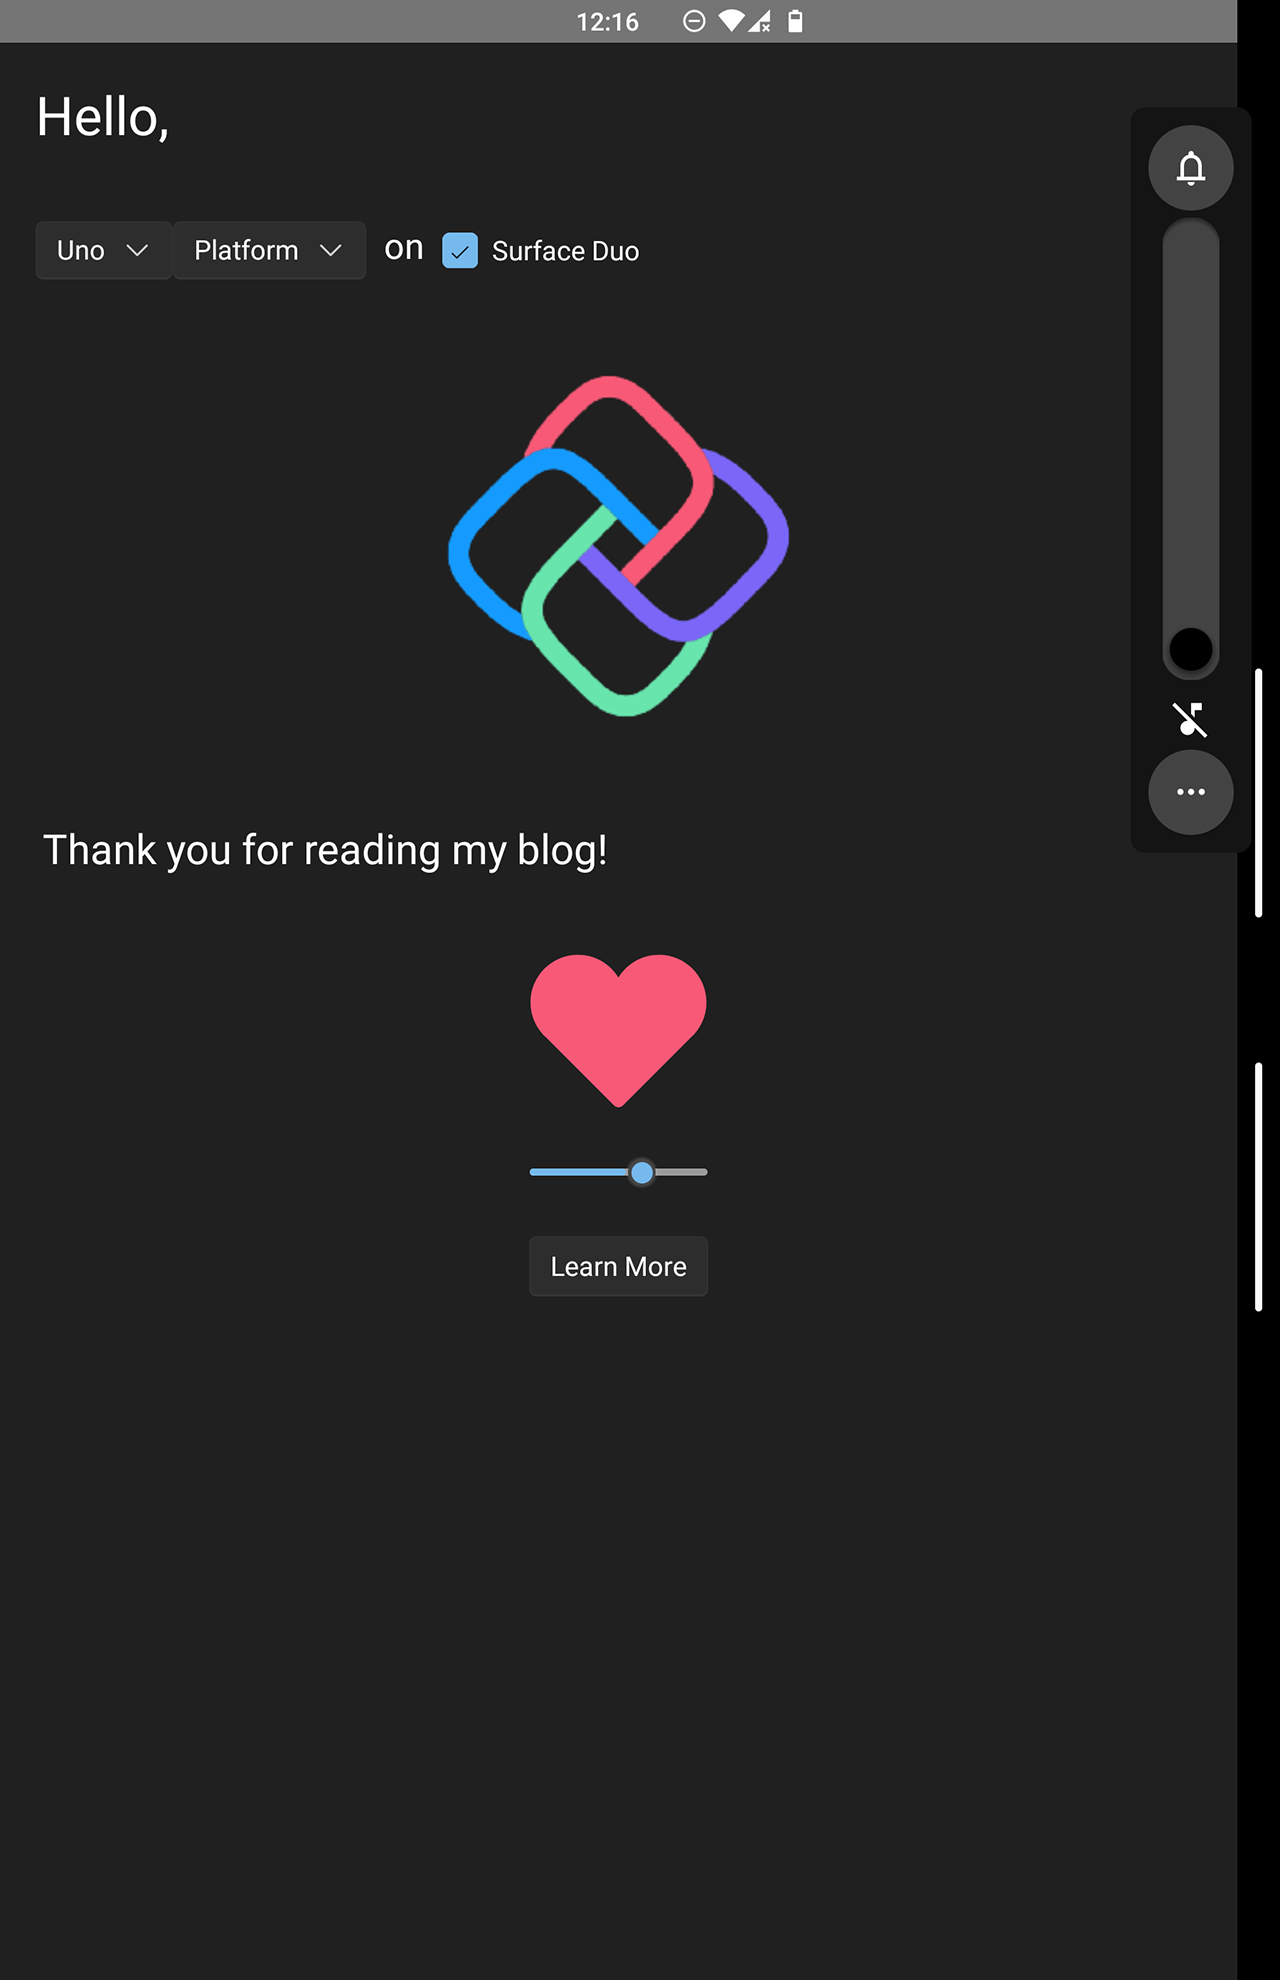 Uno Platform App, full screen vertical on the Microsoft Surface Duo